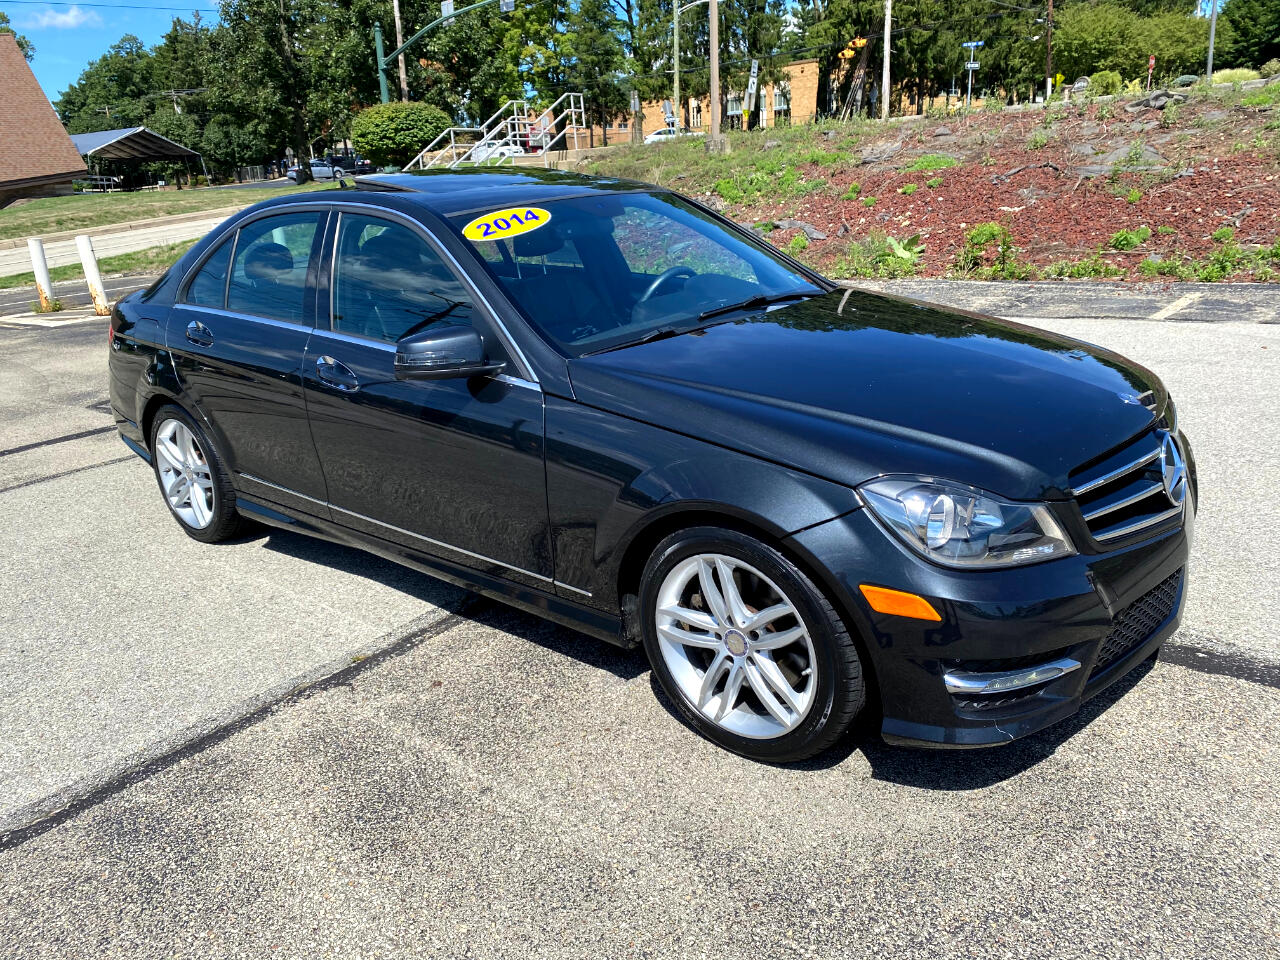 Used 2014 Mercedes-Benz C-Class C300 4MATIC Sport Sedan for Sale in ...